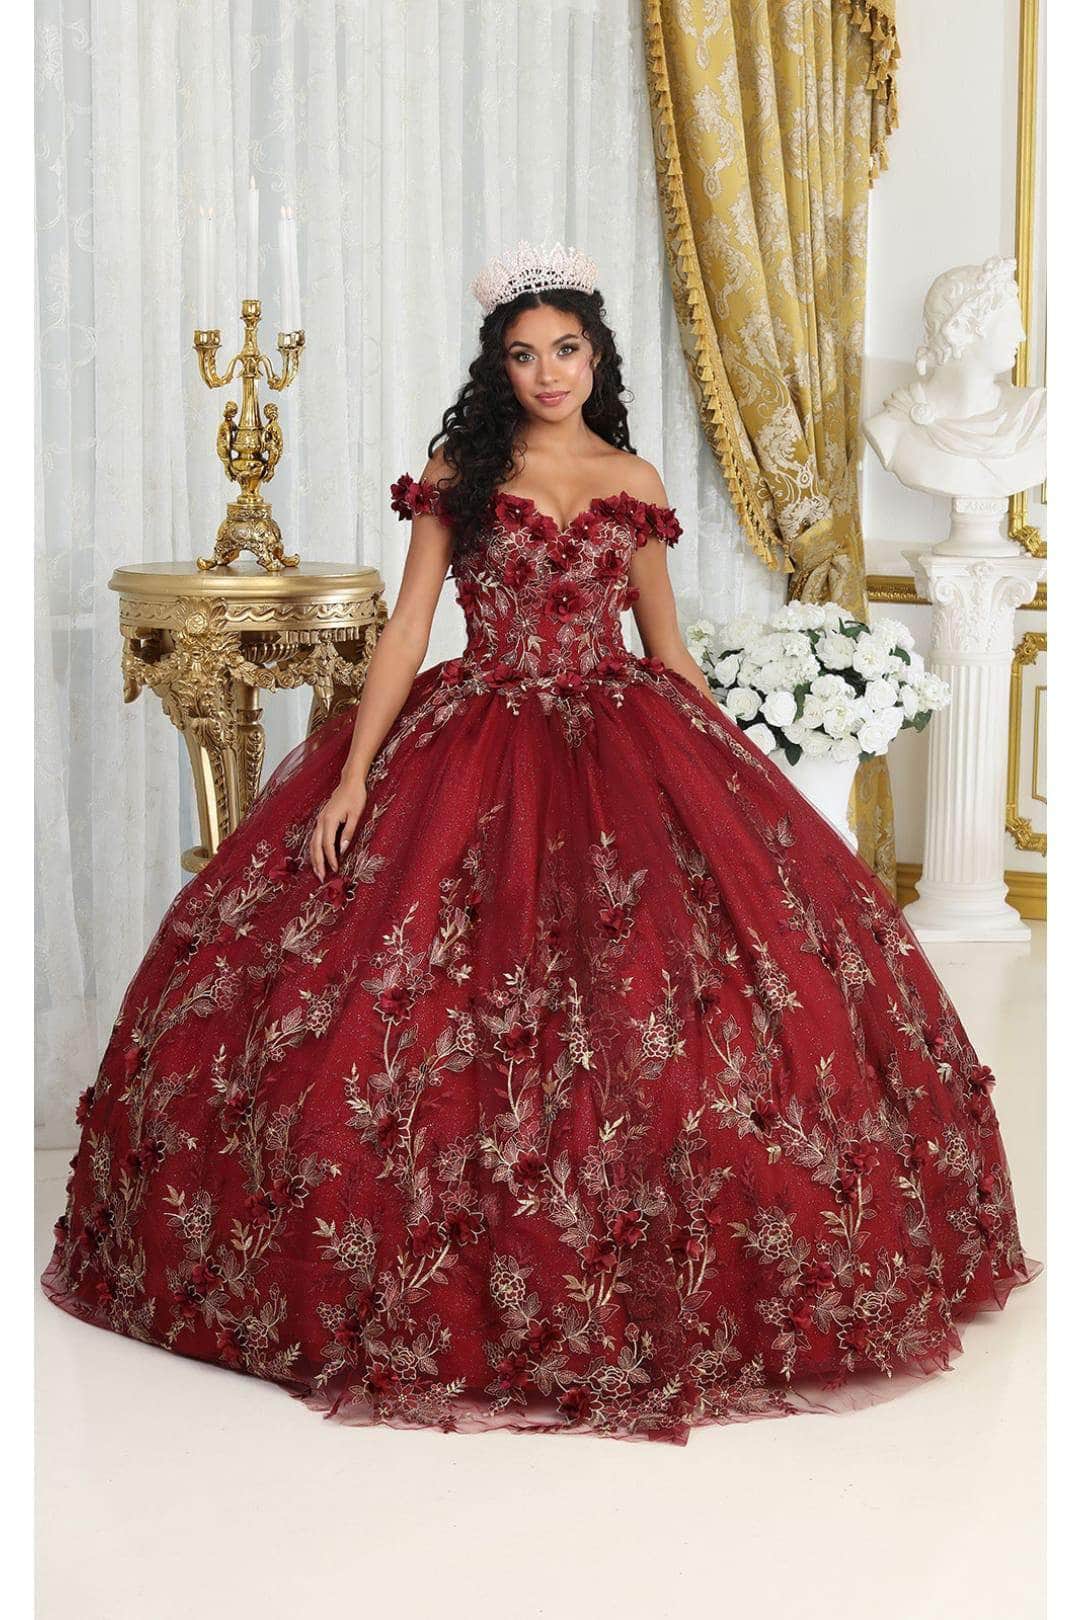 May Queen LK215 - Floral Embroidered Ballgown – Couture Candy